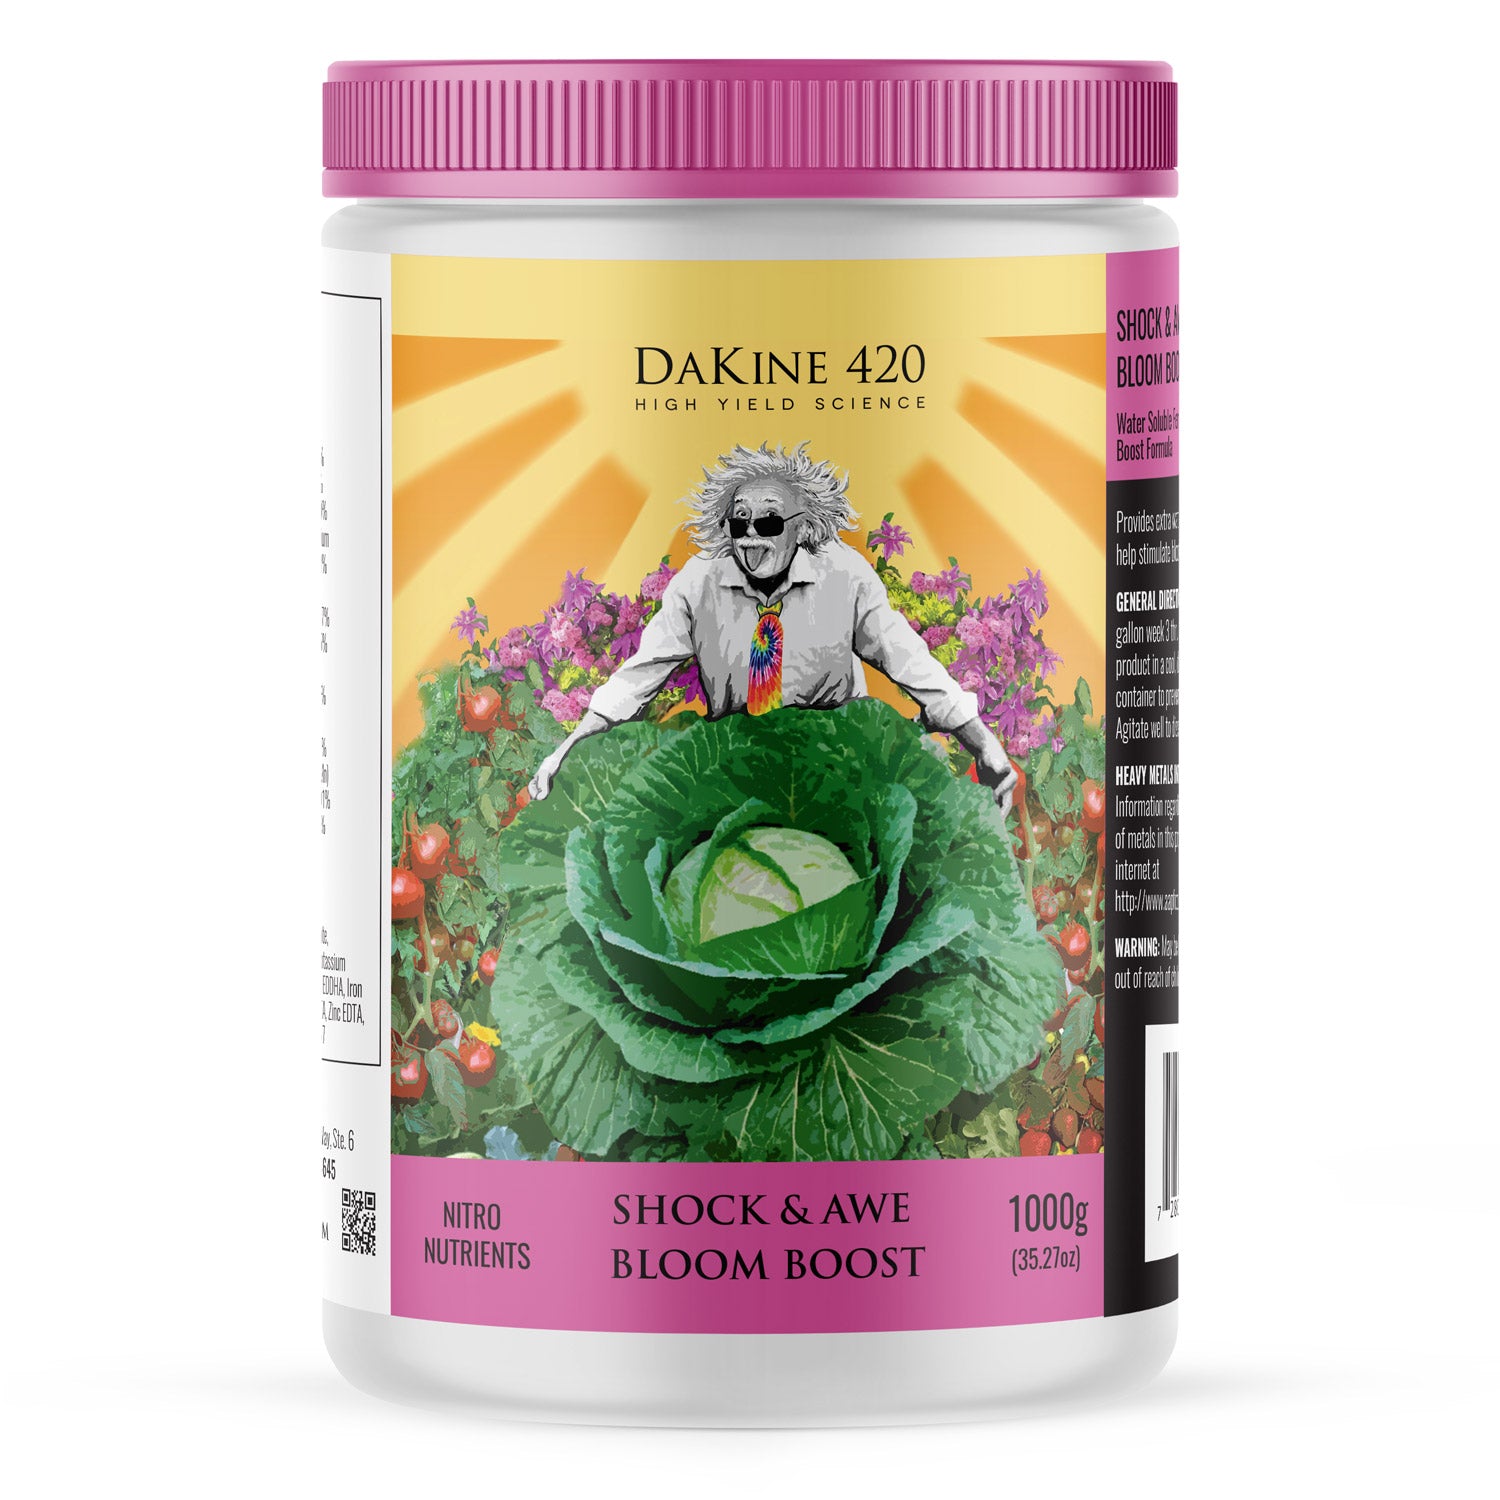 Shock and Awe is packed with phosphorus, as 6-42-12, in the perfect ratio with our already killer Bloom Boost formula.